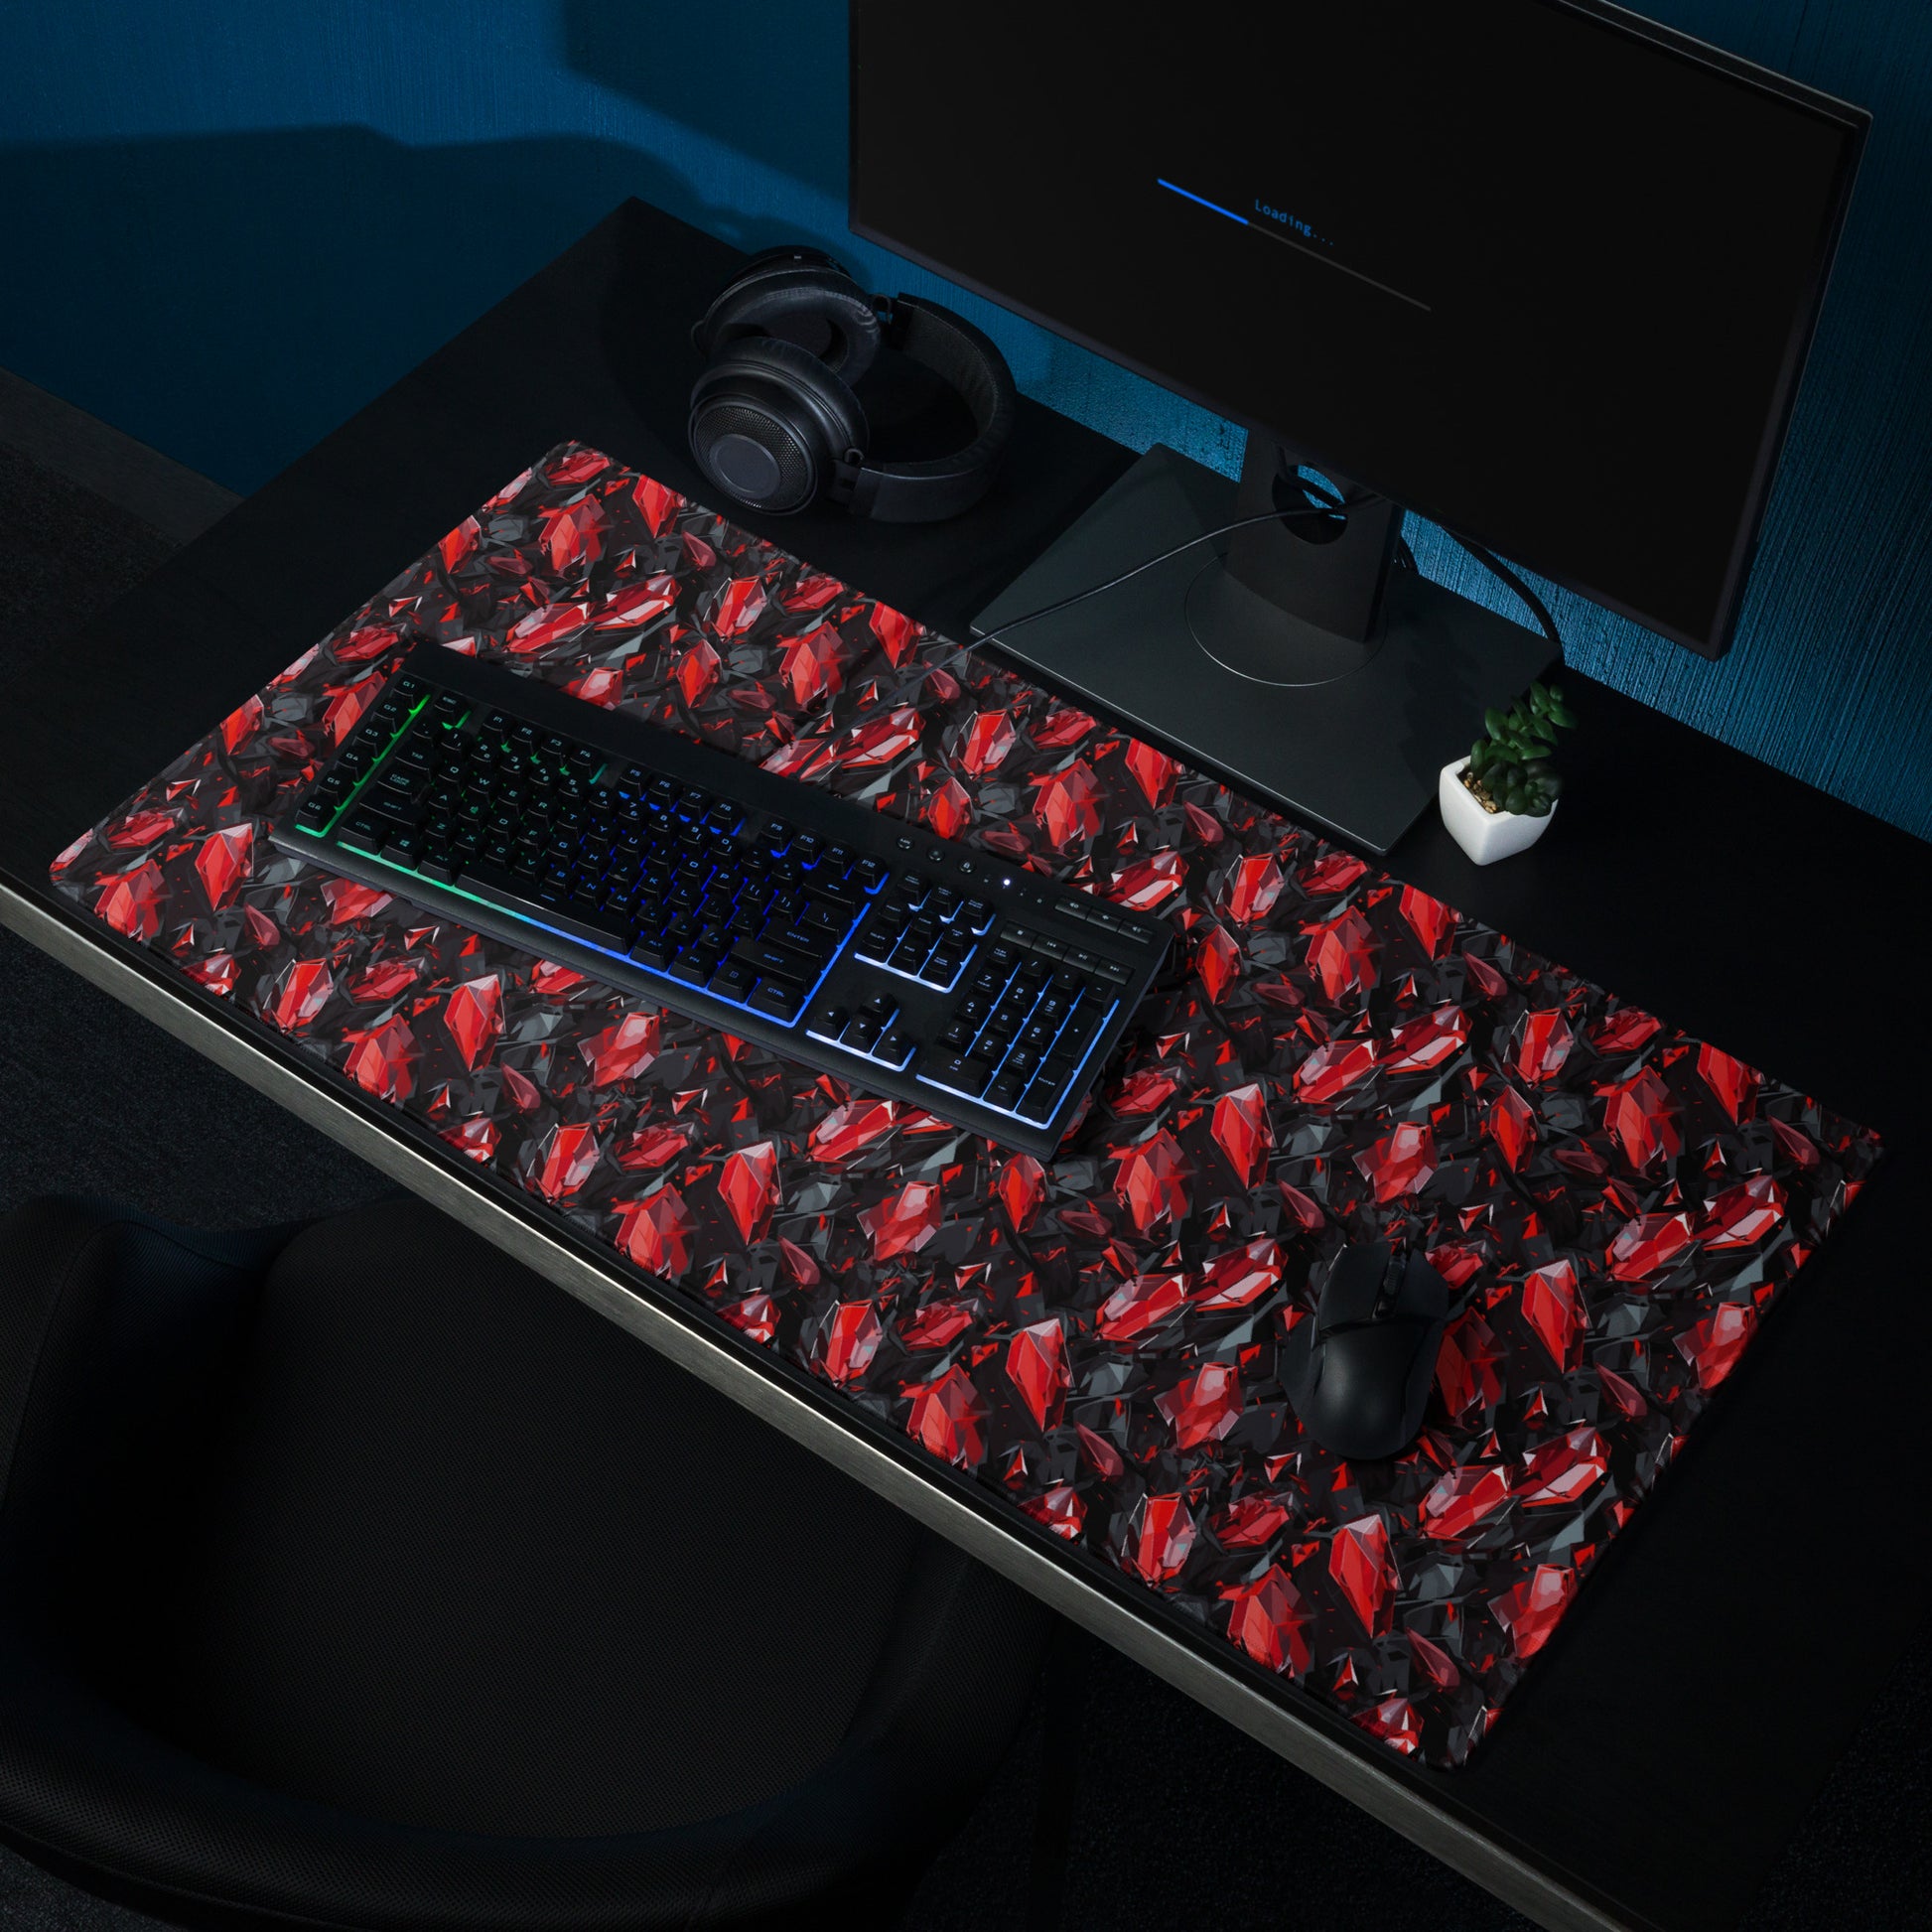 A 36" x 18" gaming desk pad with black and red crystals. It sits on a black desk with a keyboard, monitor, and mouse.